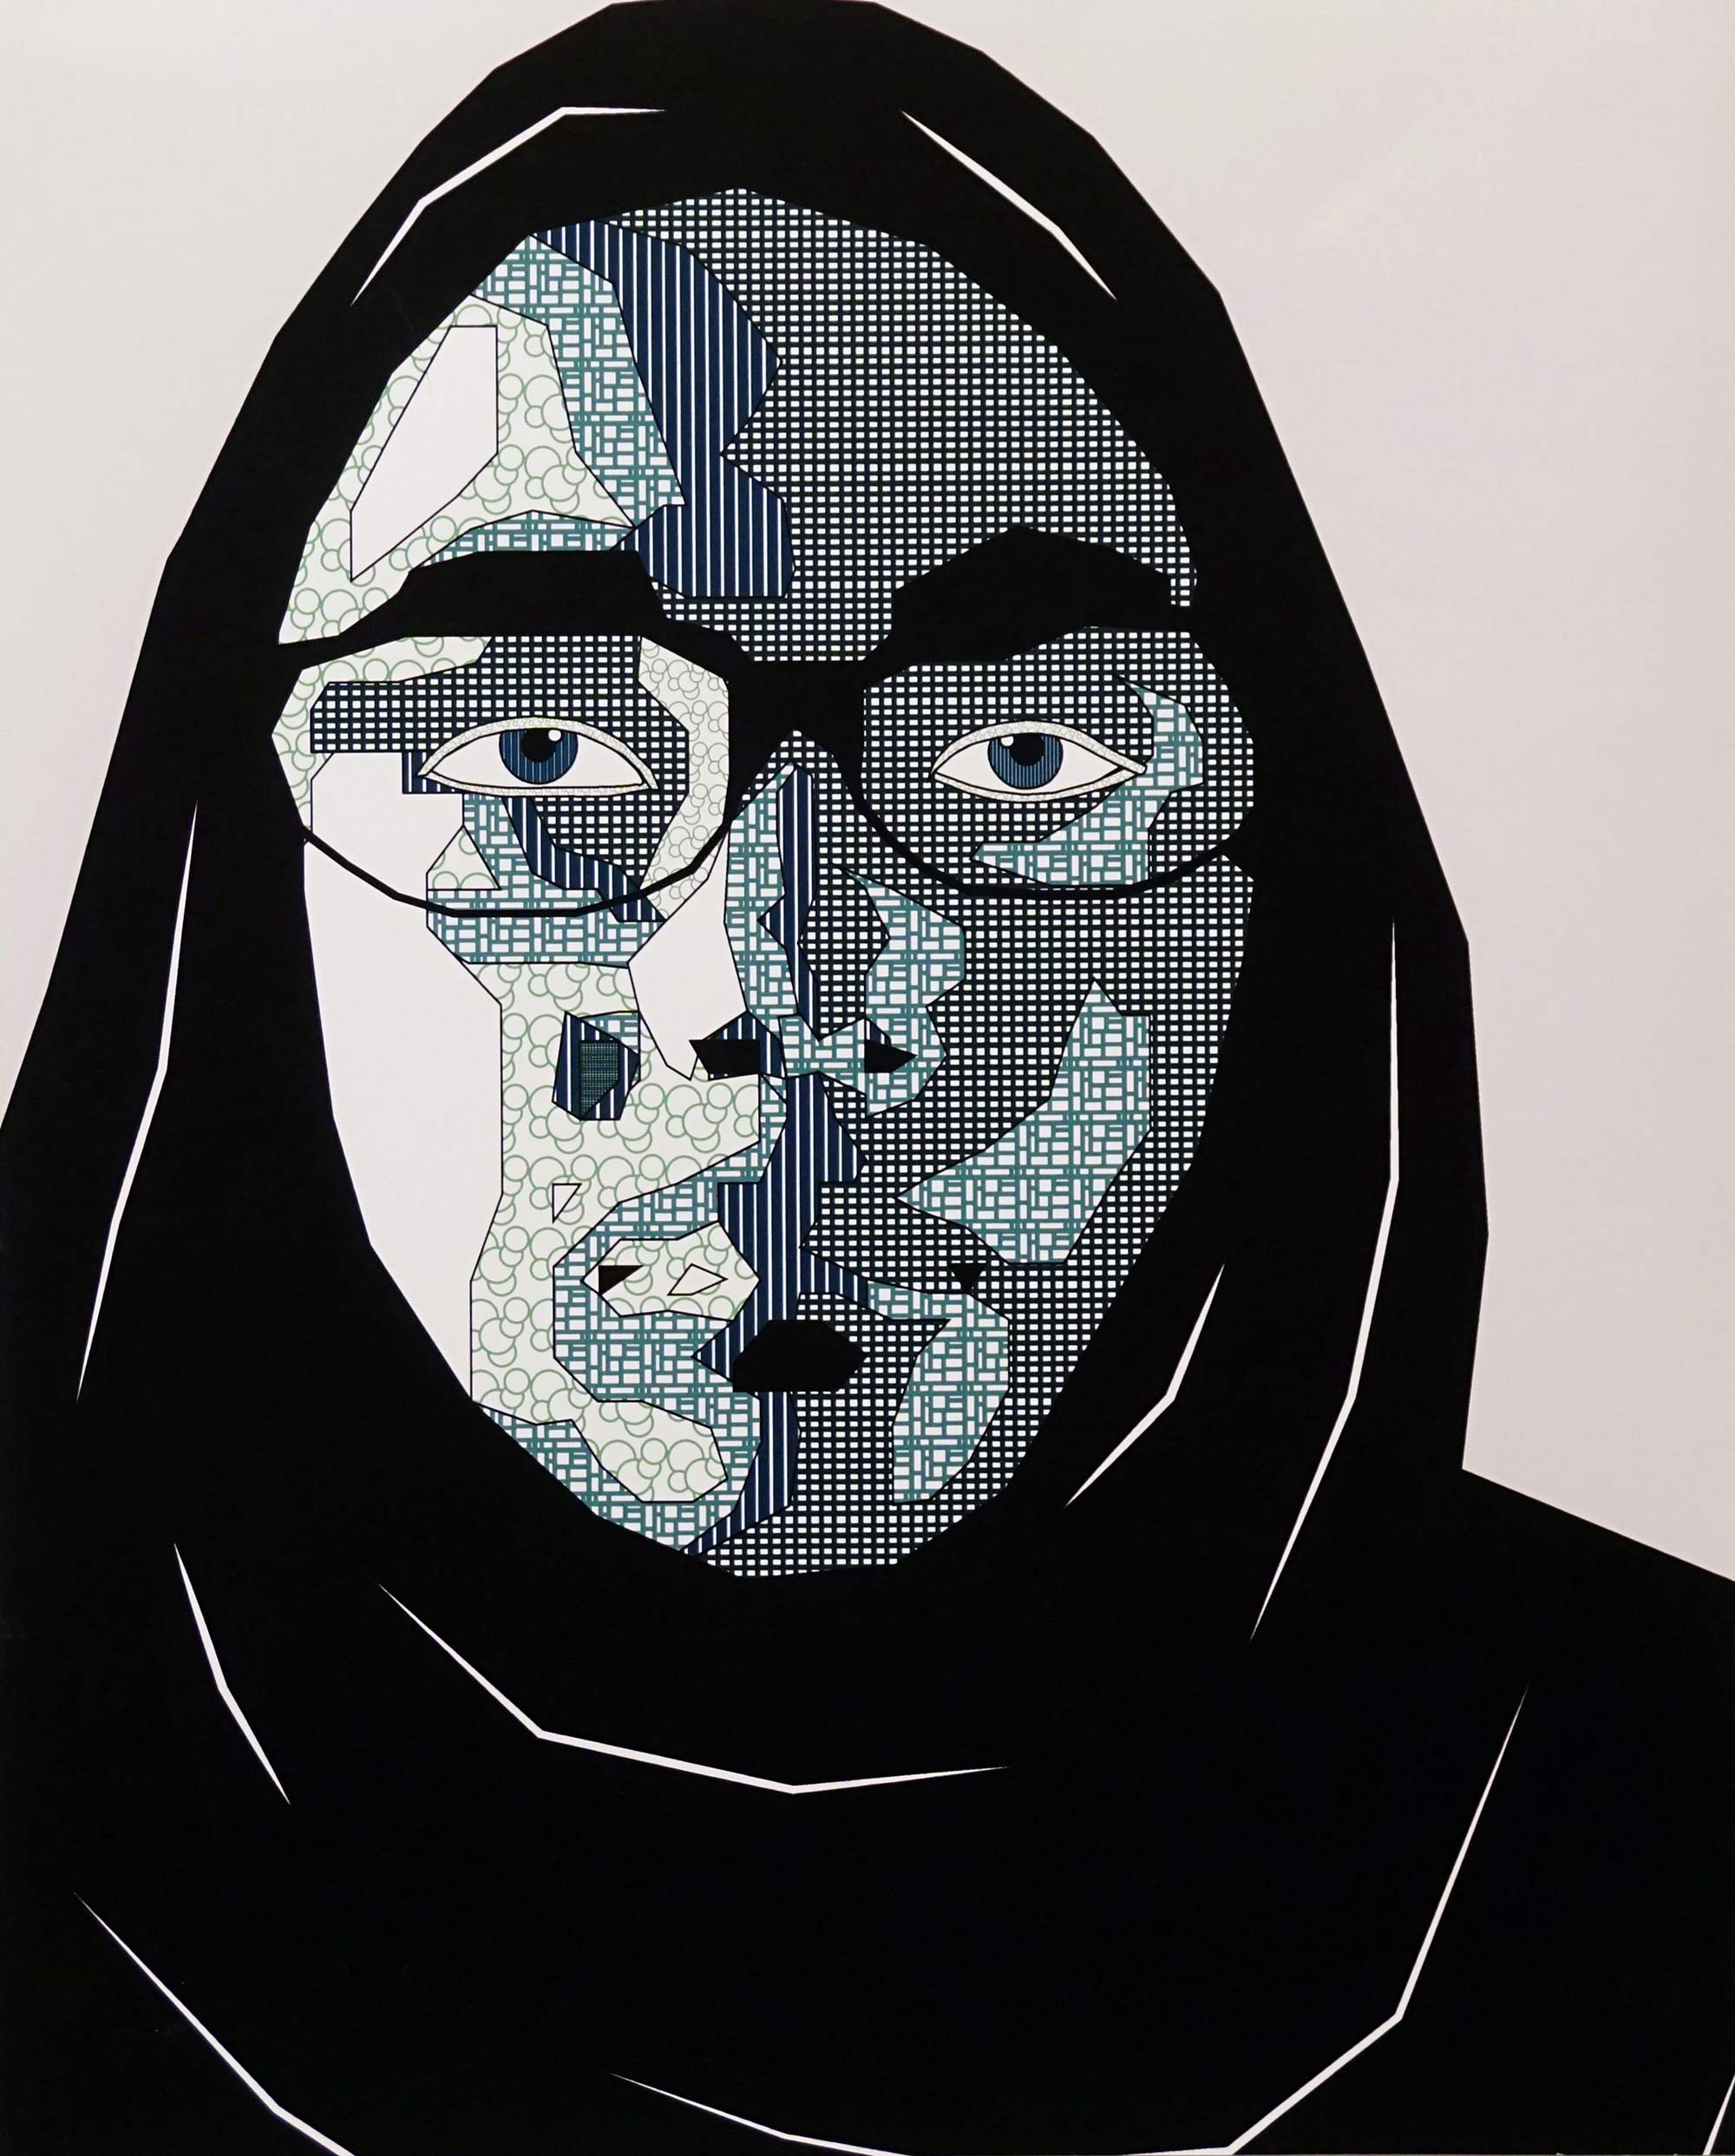 An abstract portrait of a person with a head covering and textures covering shadowed portions of their face